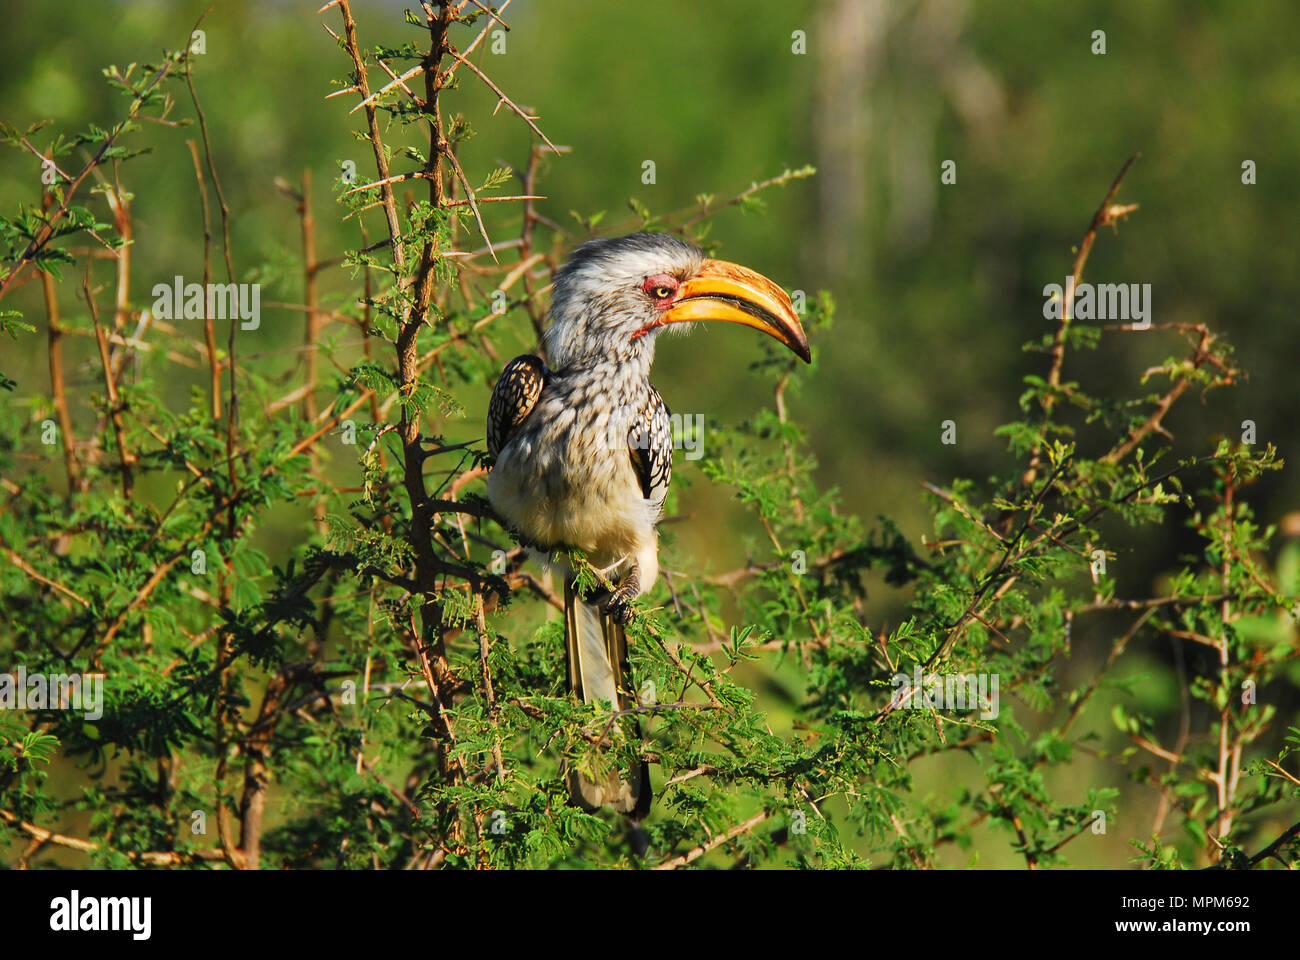 Close up of the Southern Yellow Billed Hornbill which is most often on the ground.  This beautiful bird stayed on the branch for only a moment. Stock Photo